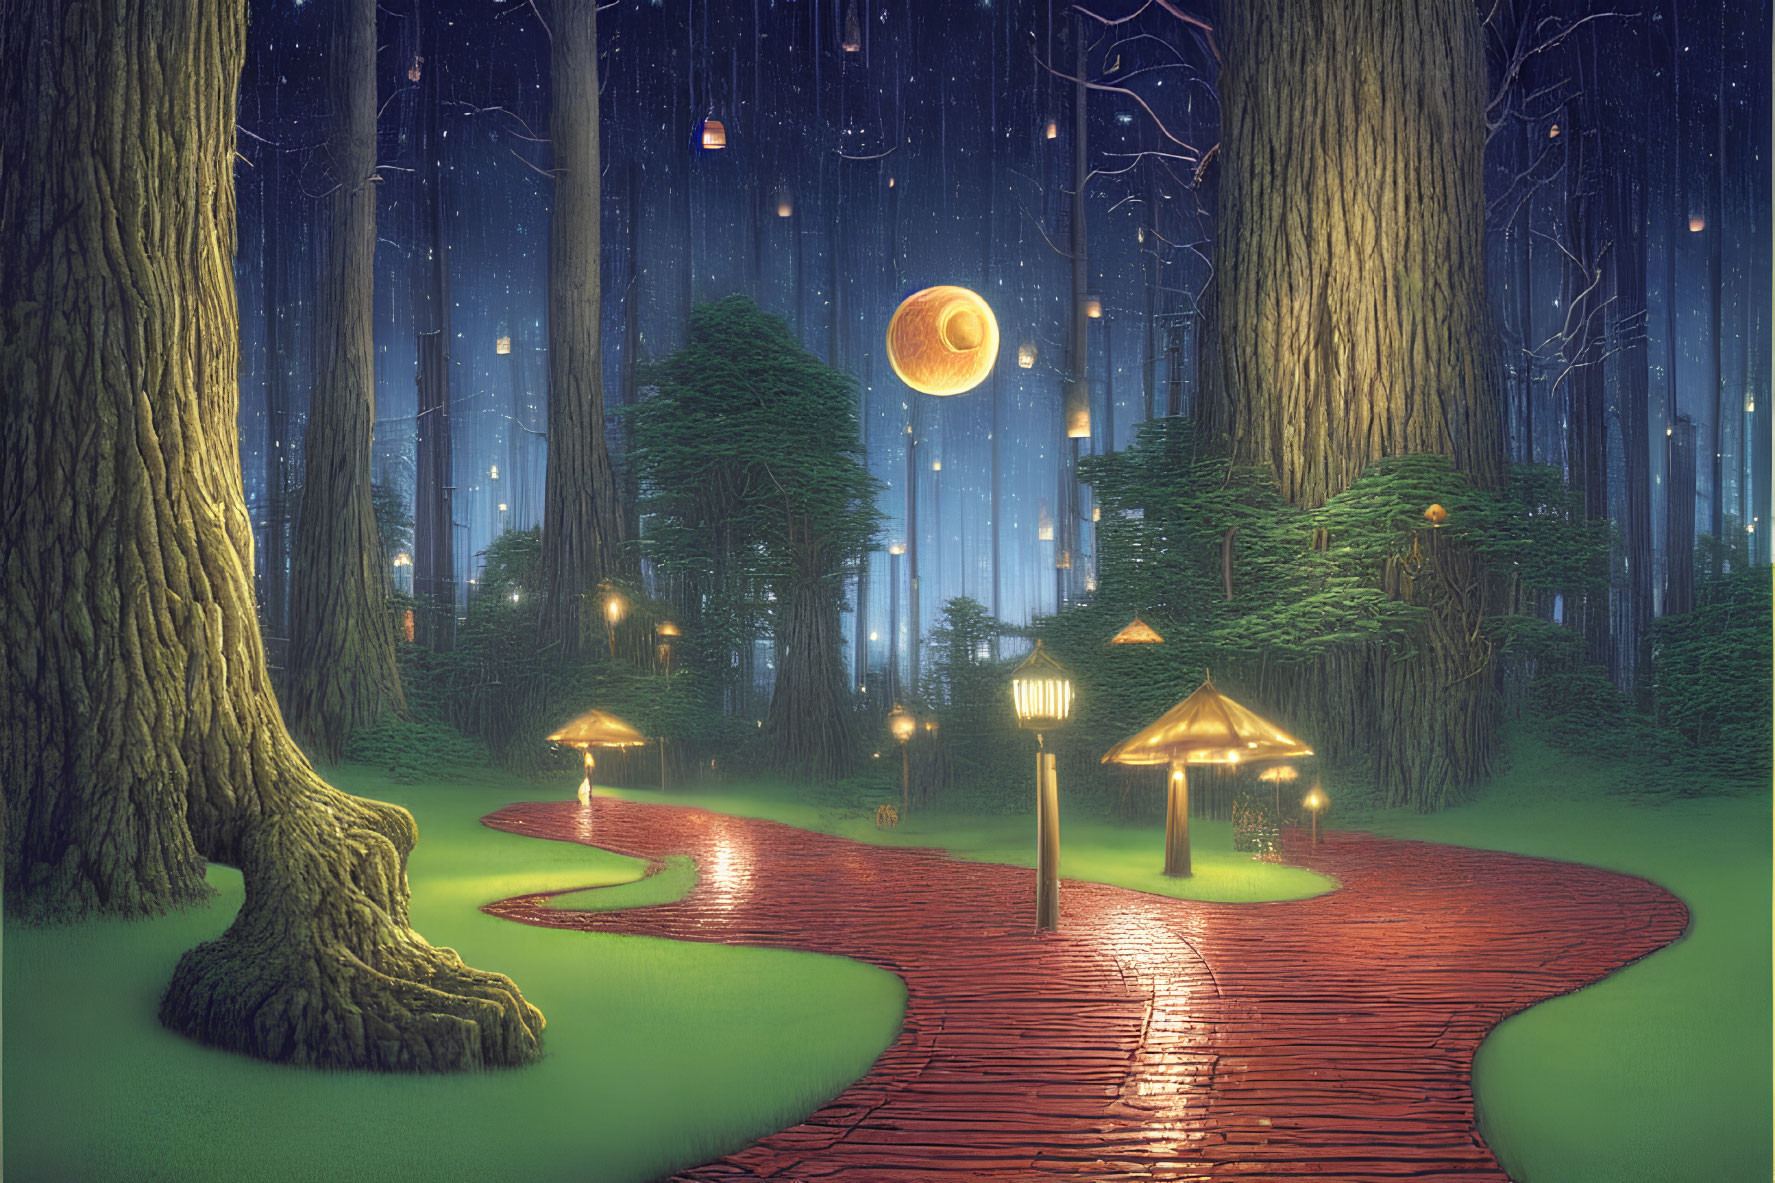 Enchanting night forest with glowing mushrooms, red brick path, streetlamp, large moon, and